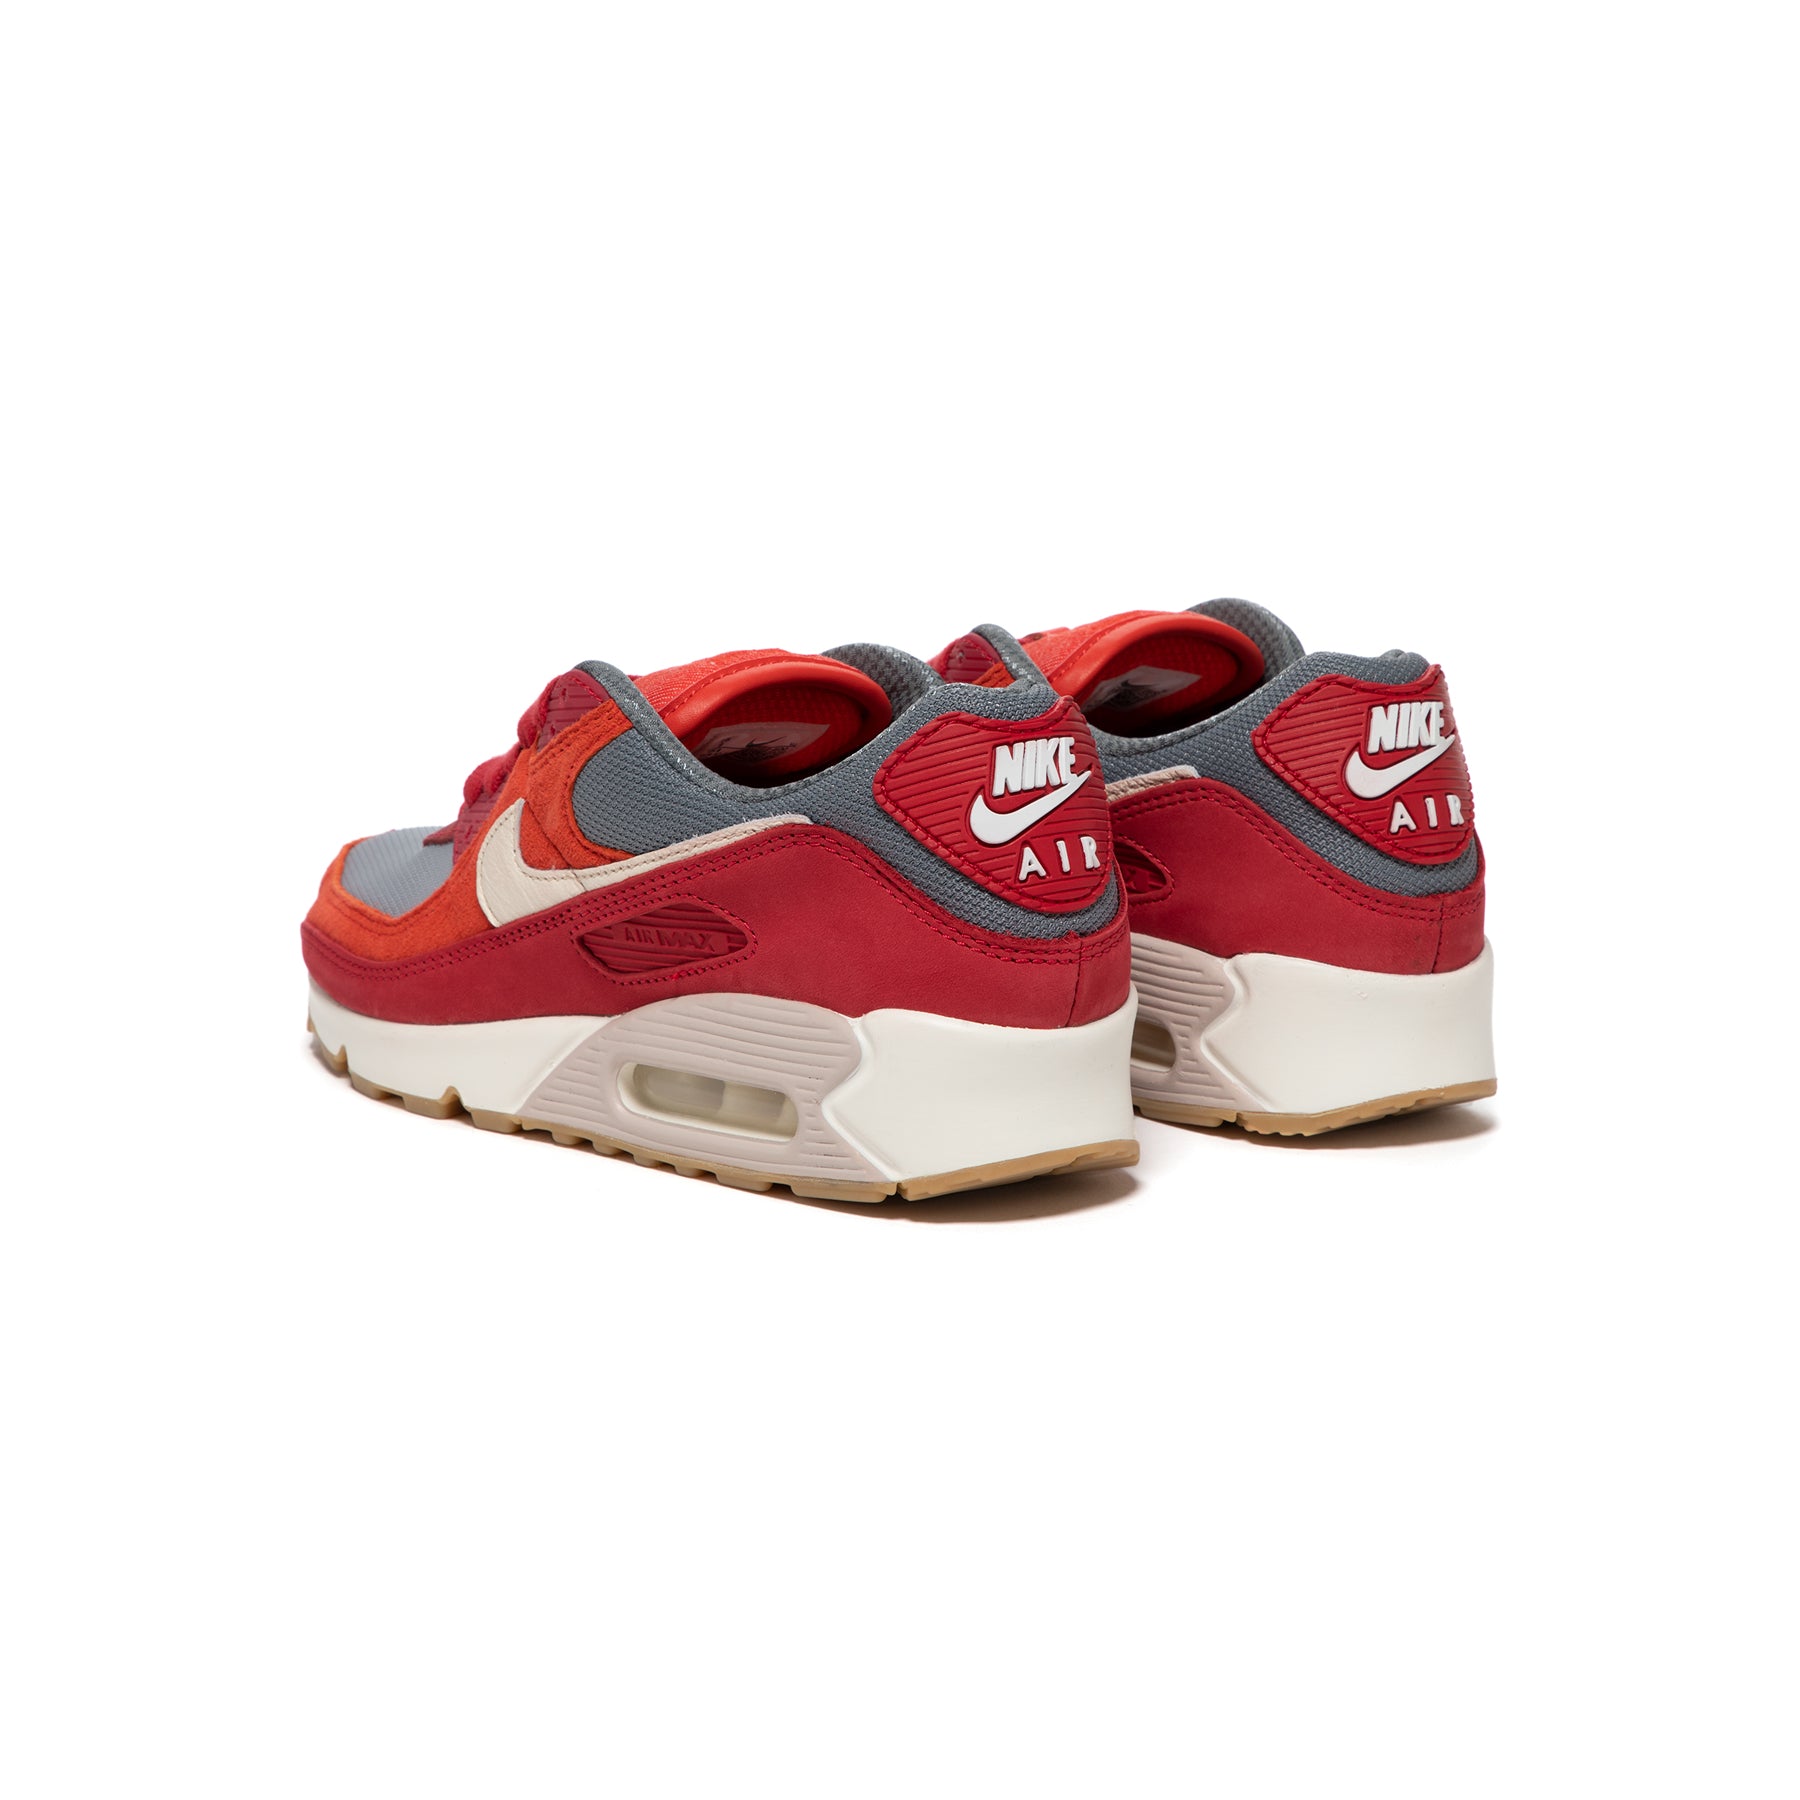 Efficiënt Bisschop oud Nike Air Max 90 PRM (Gym Red/Pale Ivory/Habanero Red) – Concepts